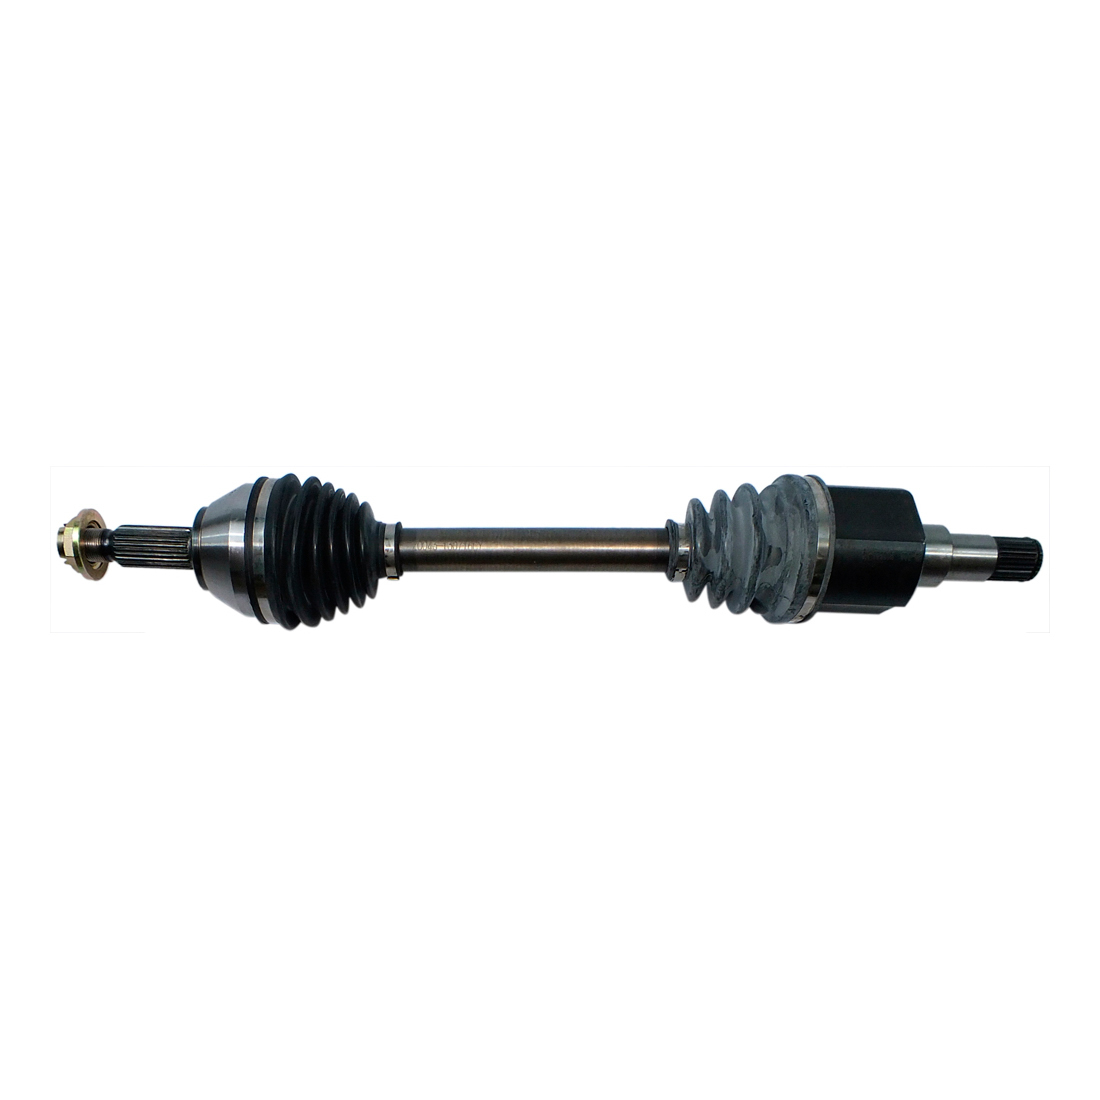 2015 Ford transit connect drive axle front 